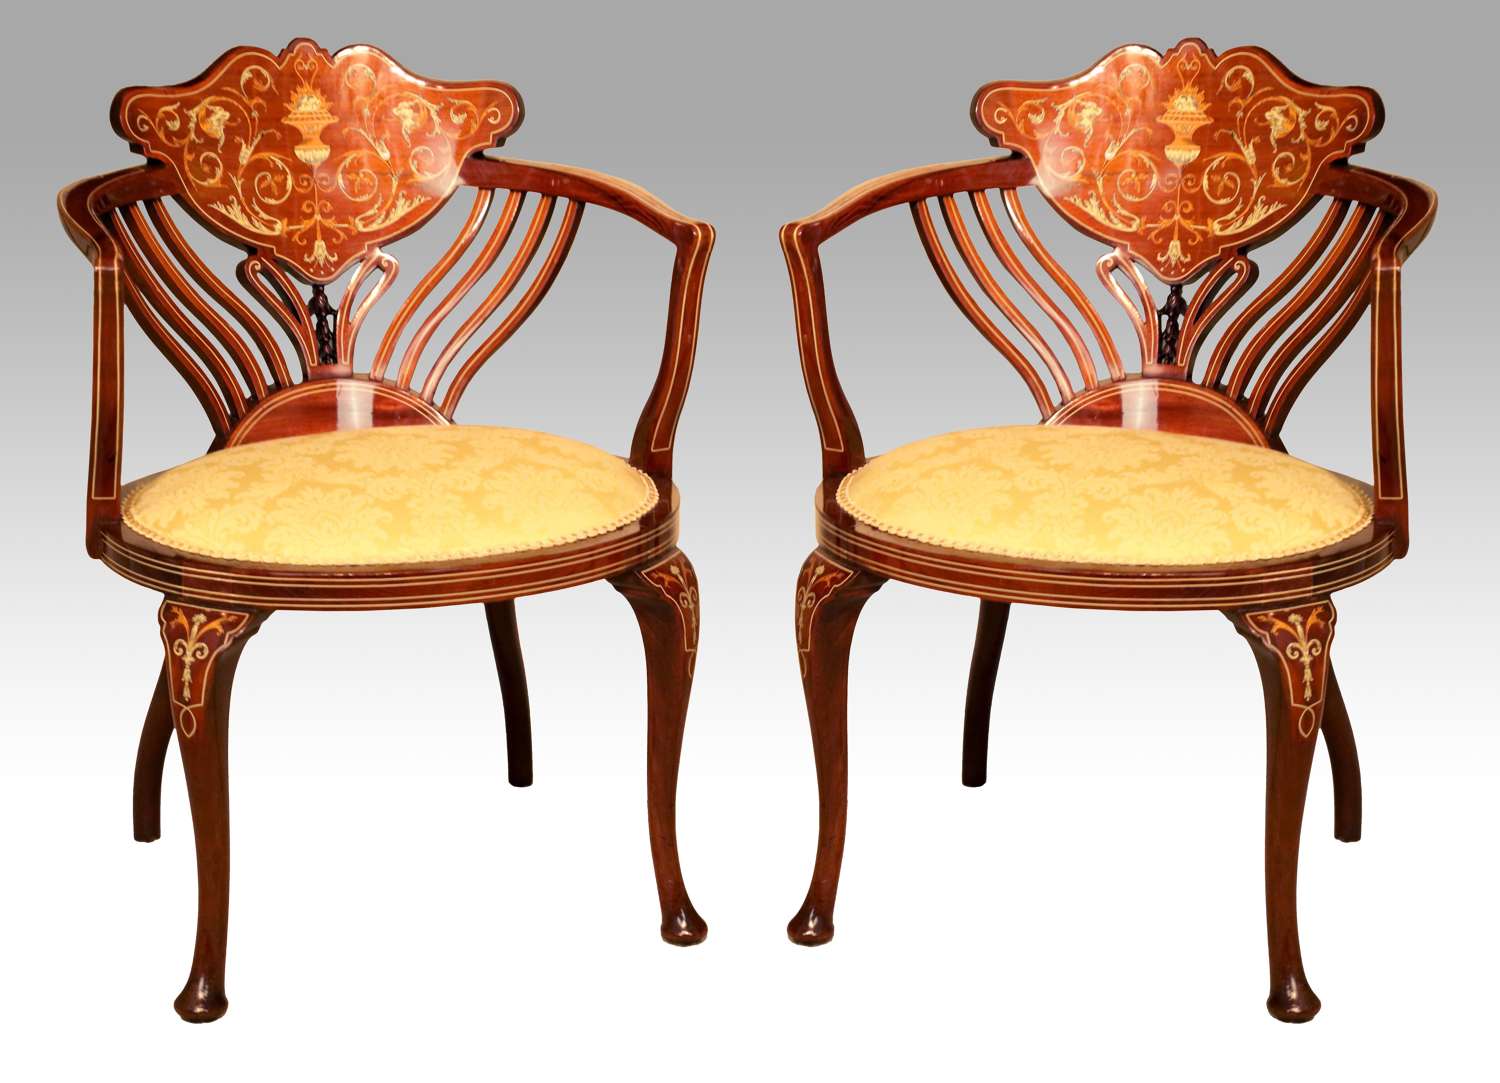 A Quality Pair of Late Victorian Mahogany Inlaid Arm Chairs